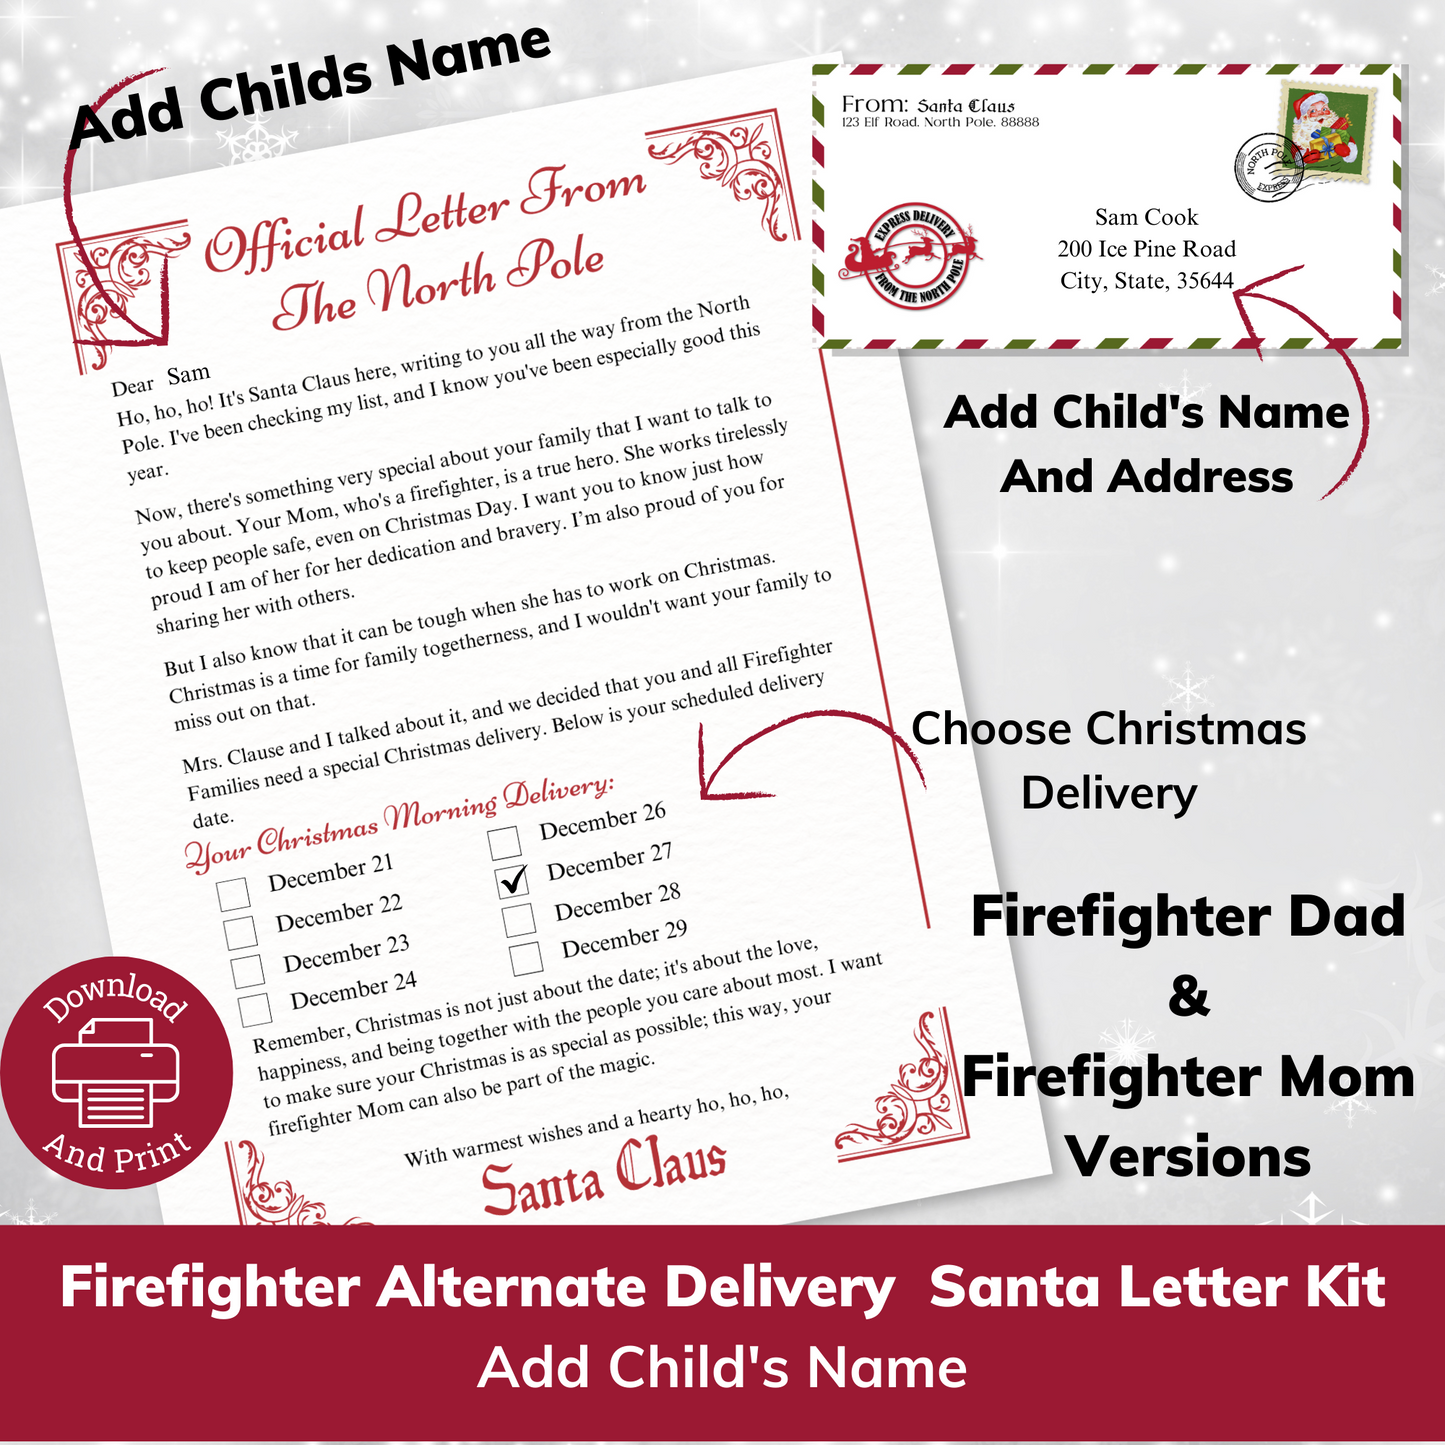 Santa's Special Message for Firefighter Families - Alternative Christmas Delivery Letter